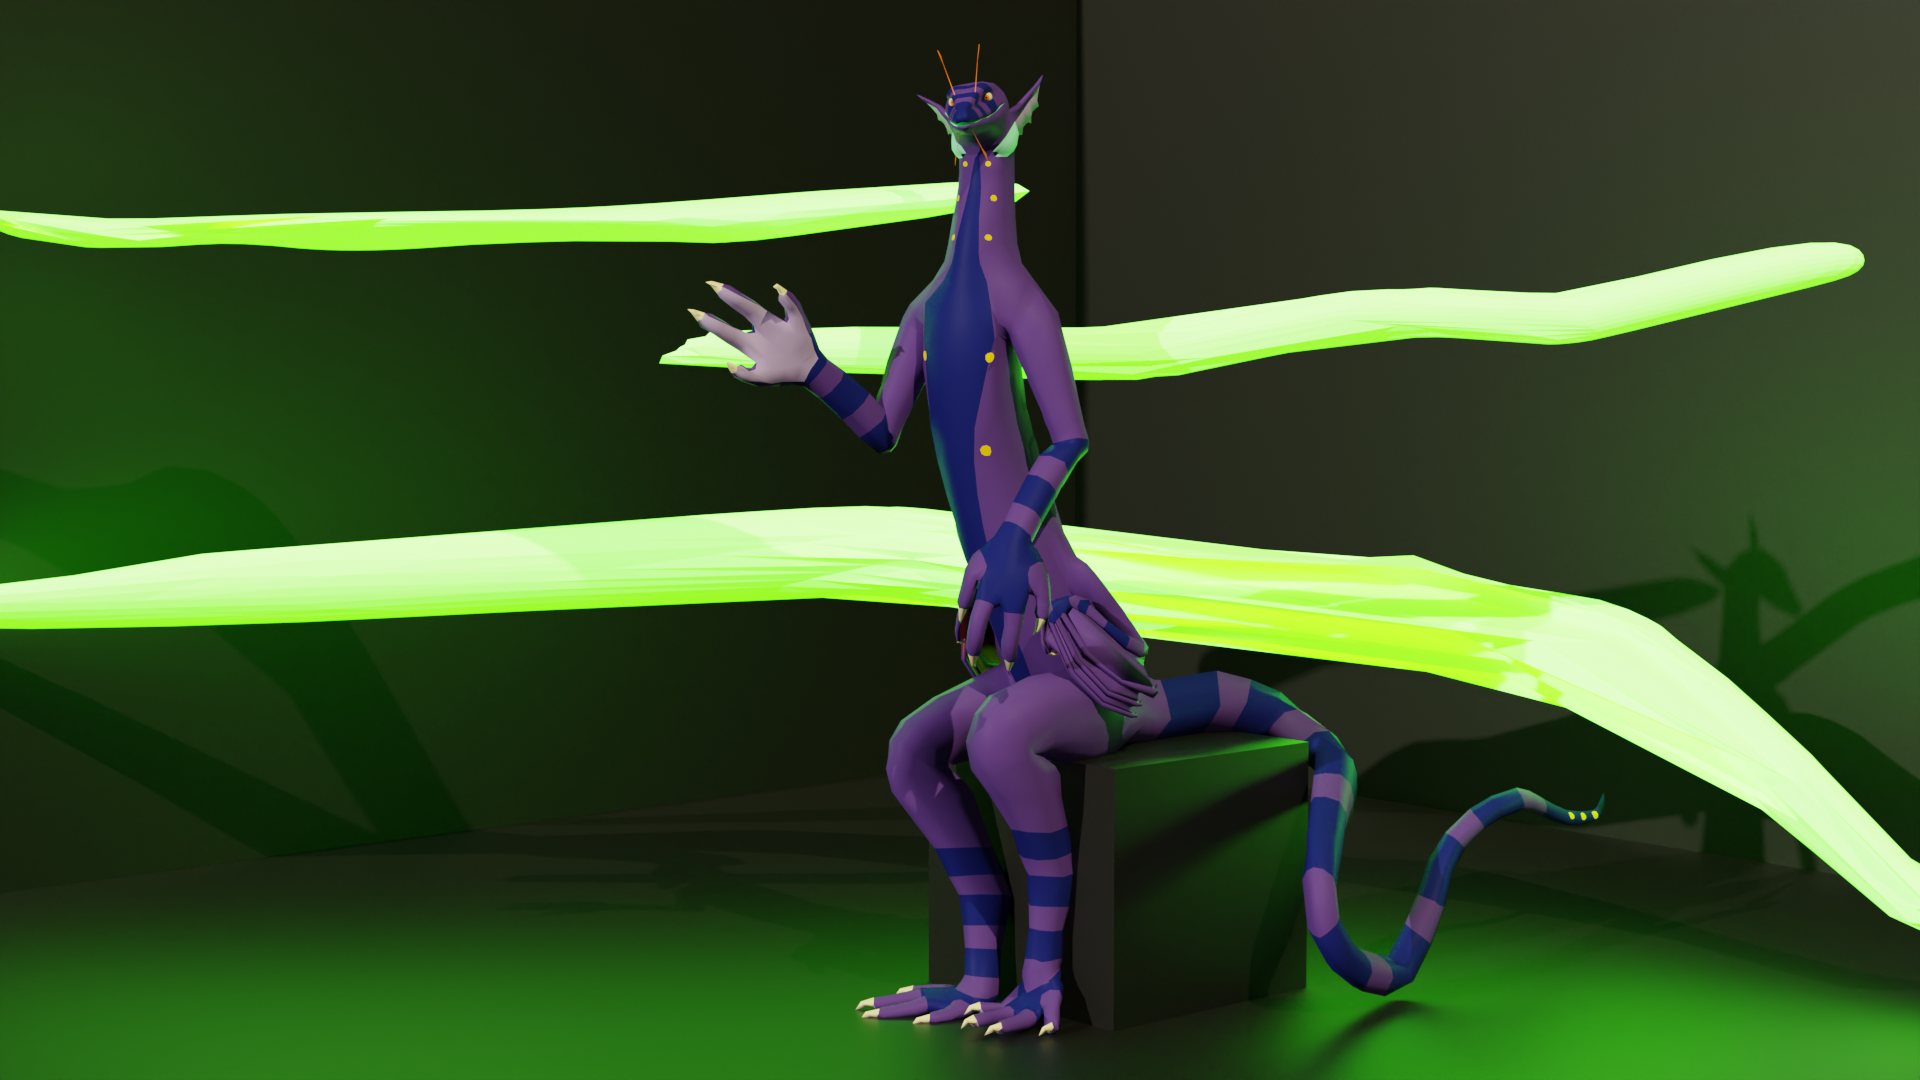 3D render of a purple snake-like alien character waving to the camera while in a black room sitting on a black cube with glowing green shapes behind them.